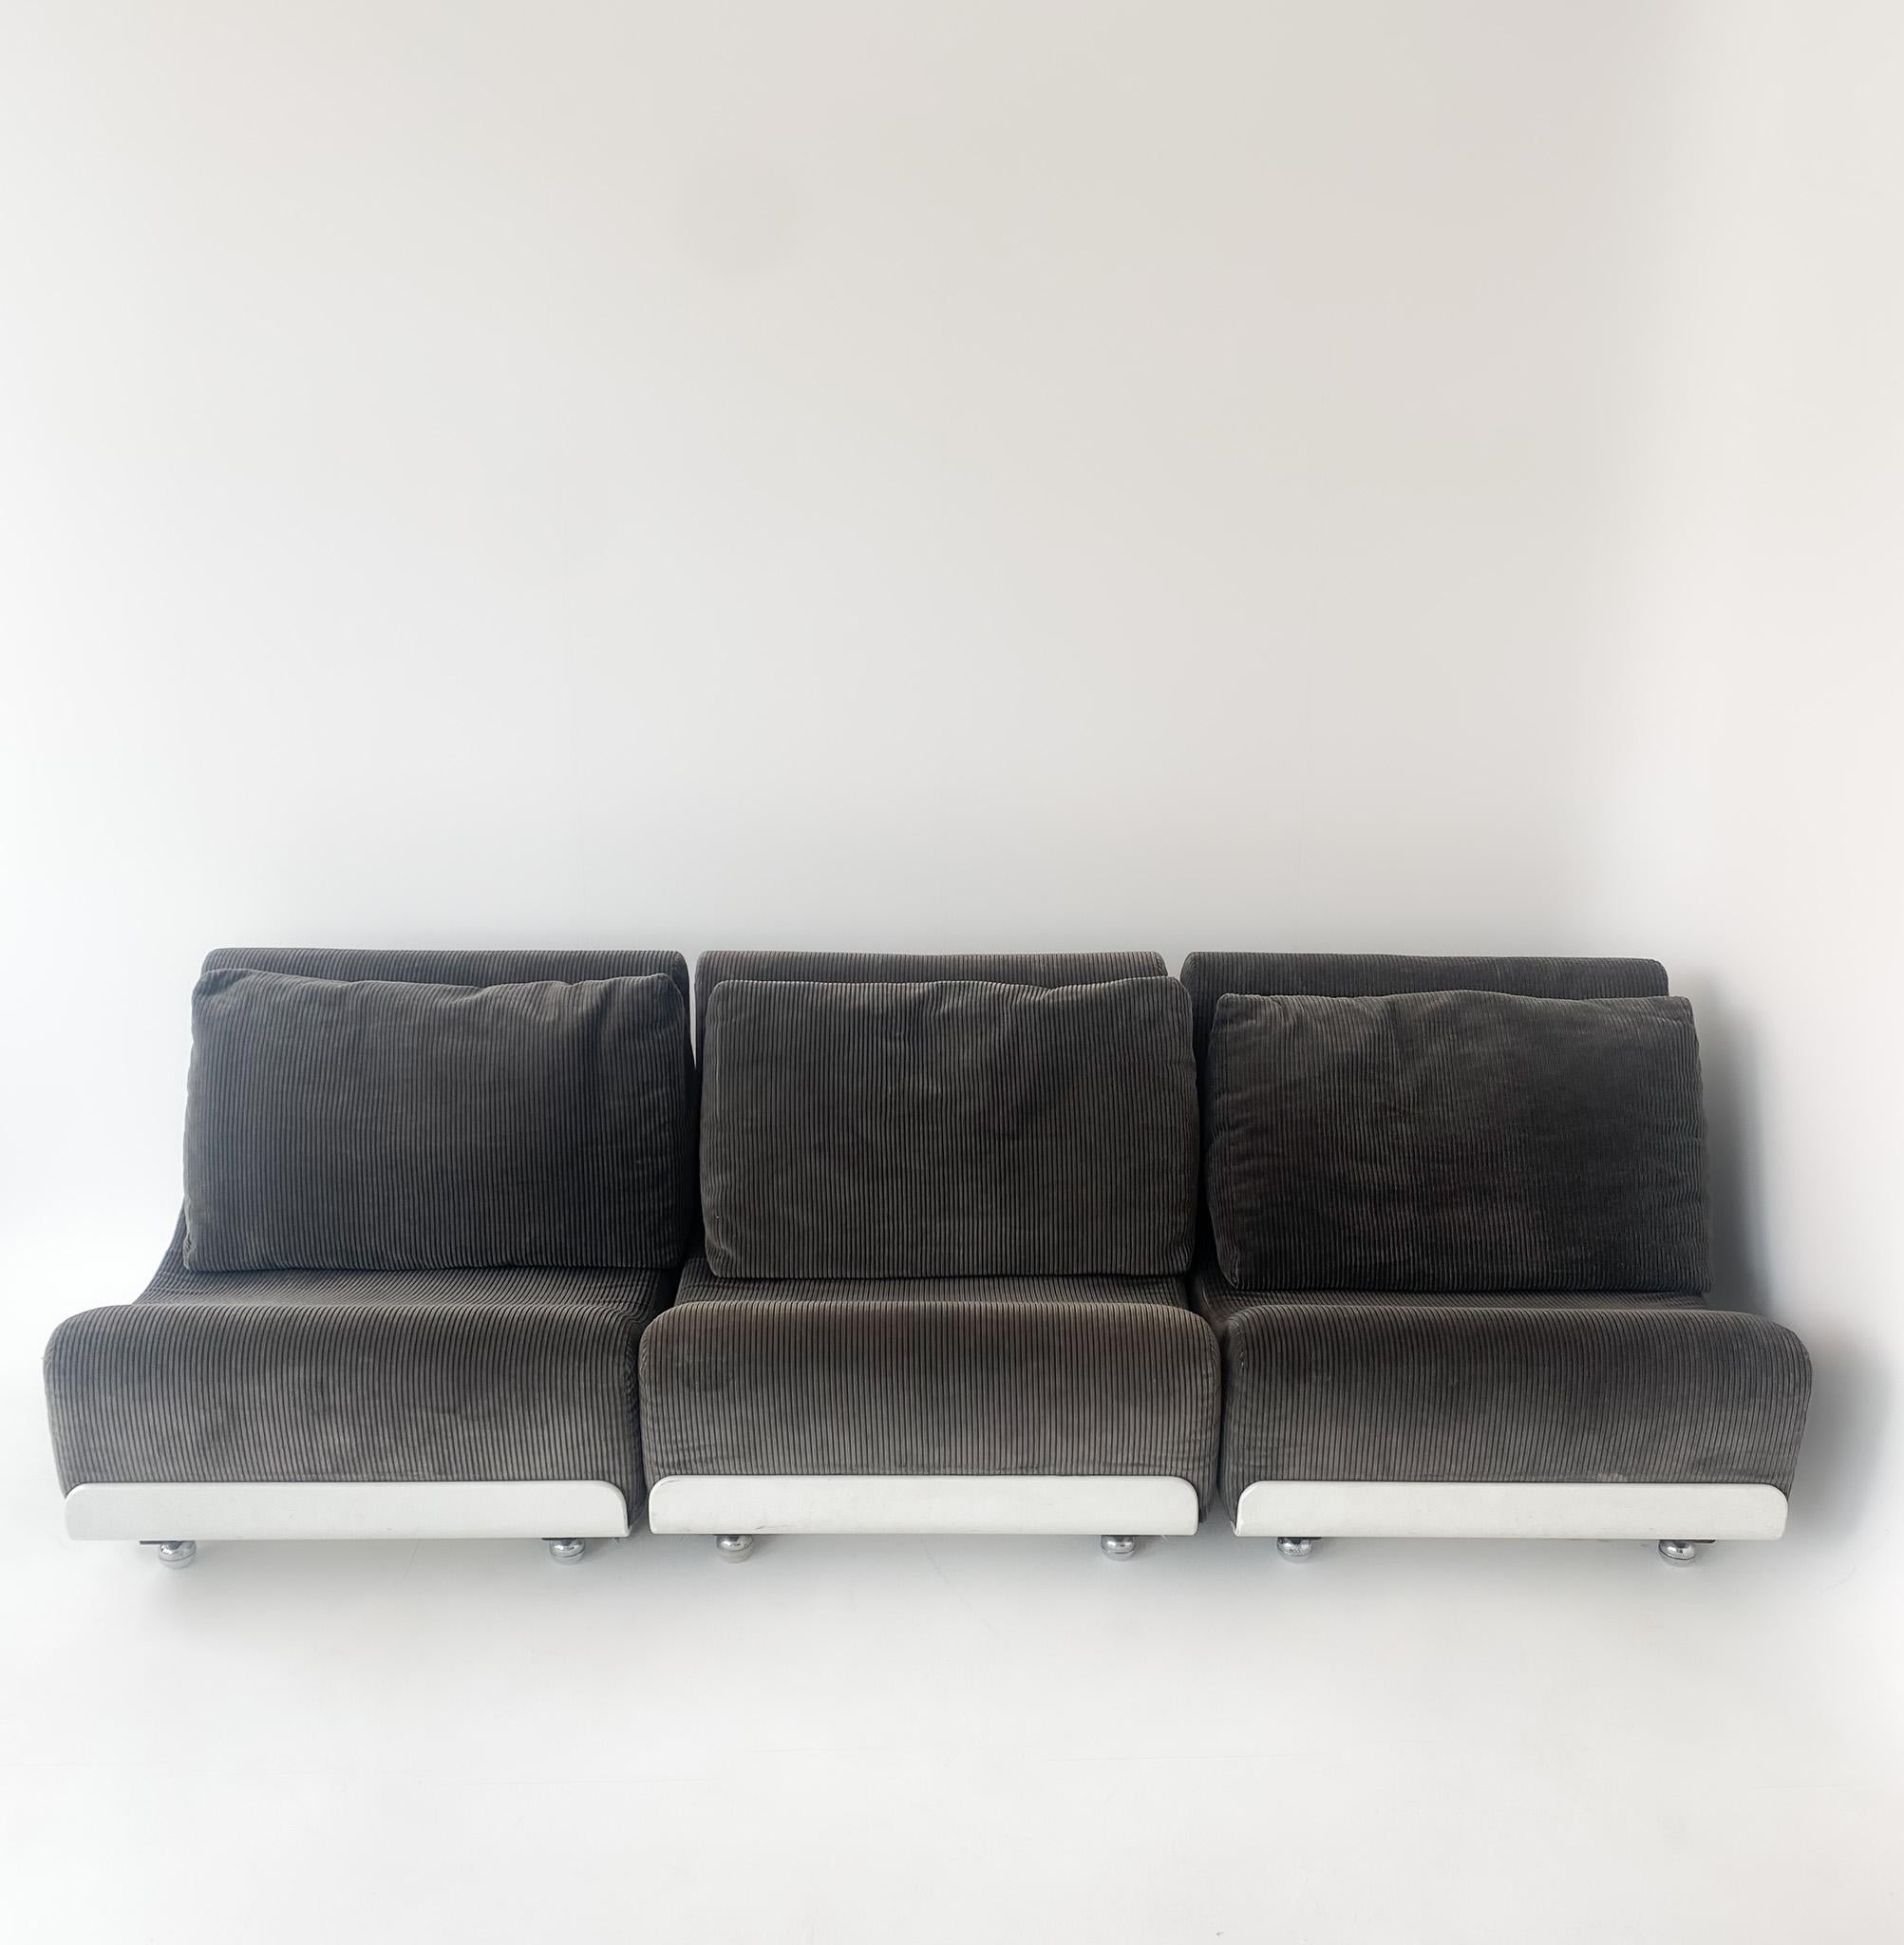 Mid-Century Modern White Grey Orbis Sofa by Luigi Colani, Germany 1970s.

Hip three-part lounge set in grey and white designed by Luigi Colani for COR in the 70s. This sofa contains three straight seating elements in an orginal grey velvet